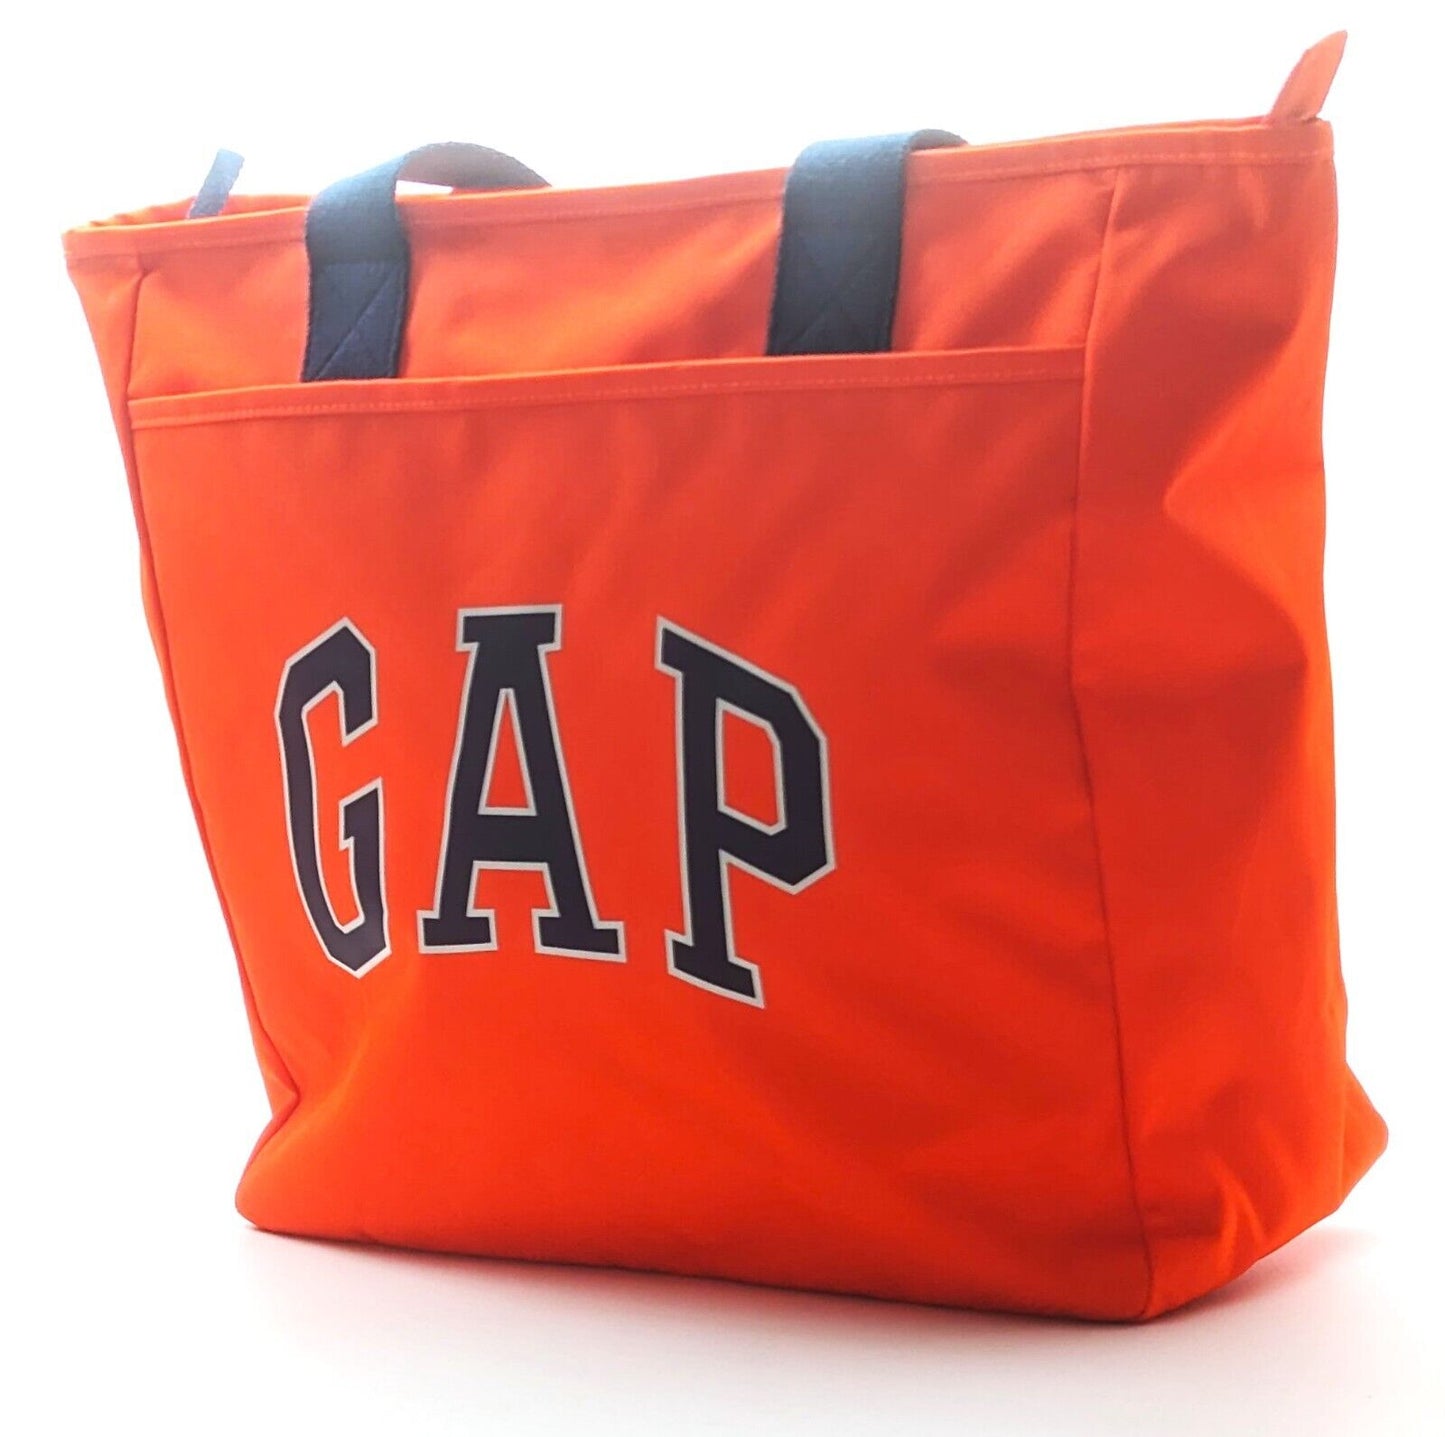 Gap Arch tote large